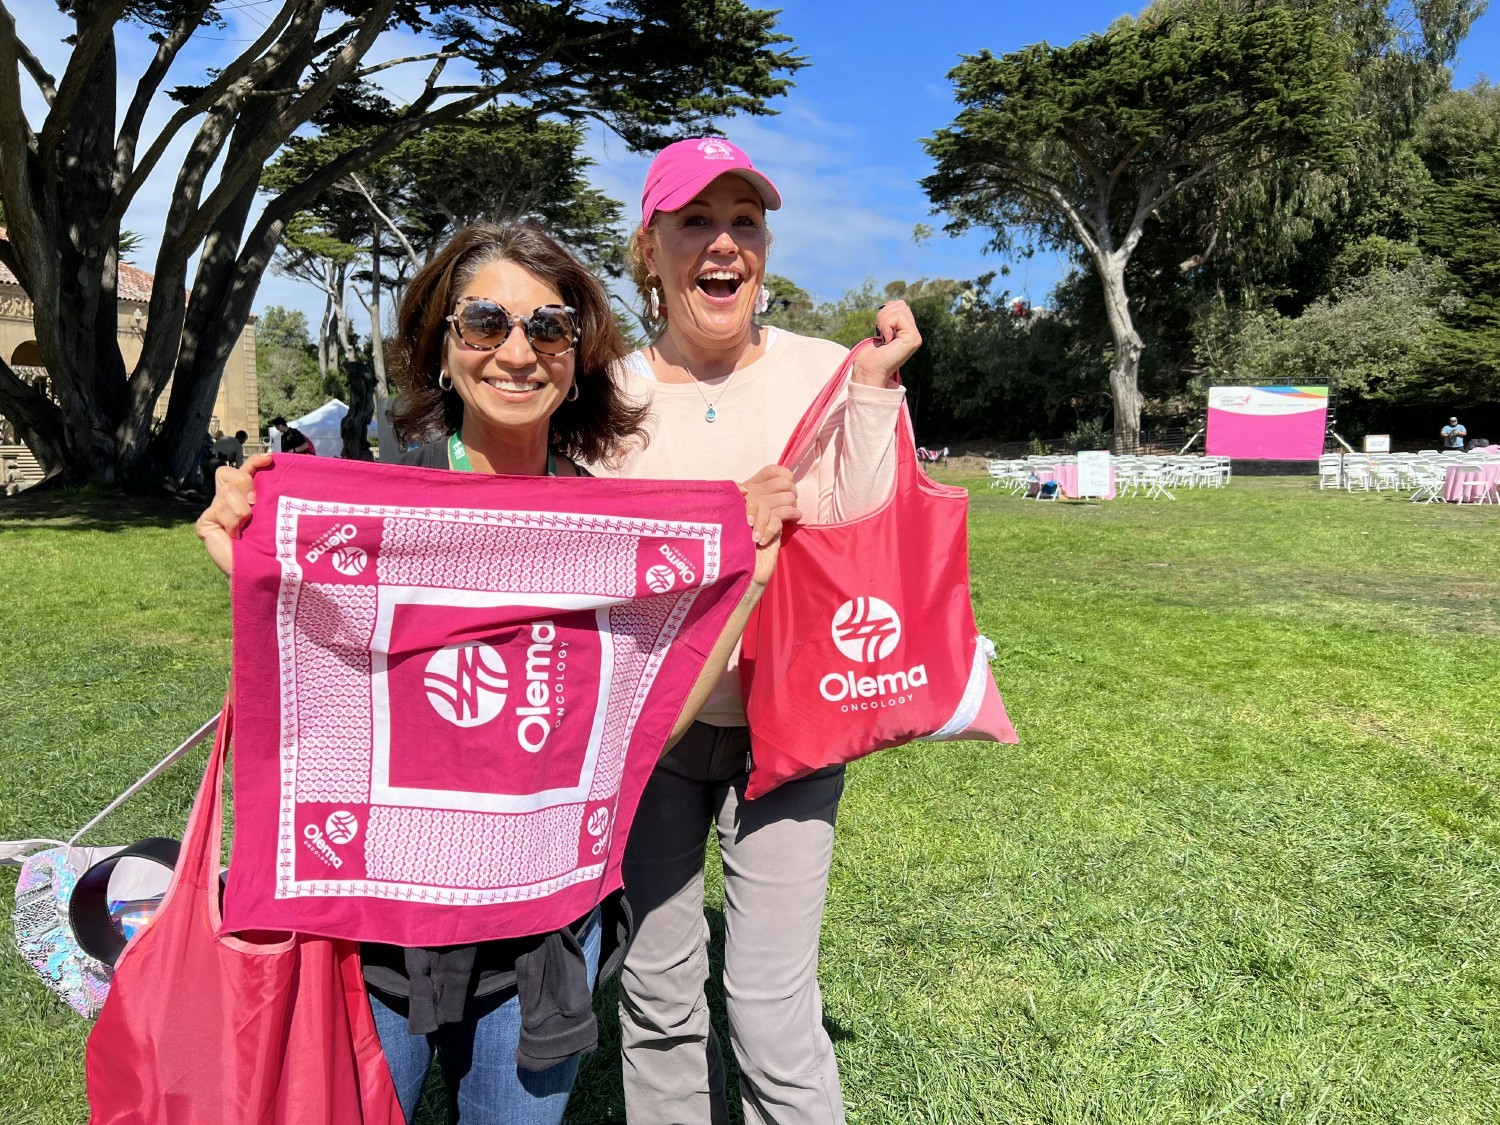 Helping the Breast Cancer Community Doesn’t Feel Like Work: Our CMO and team gearing up to walk in support of patients.